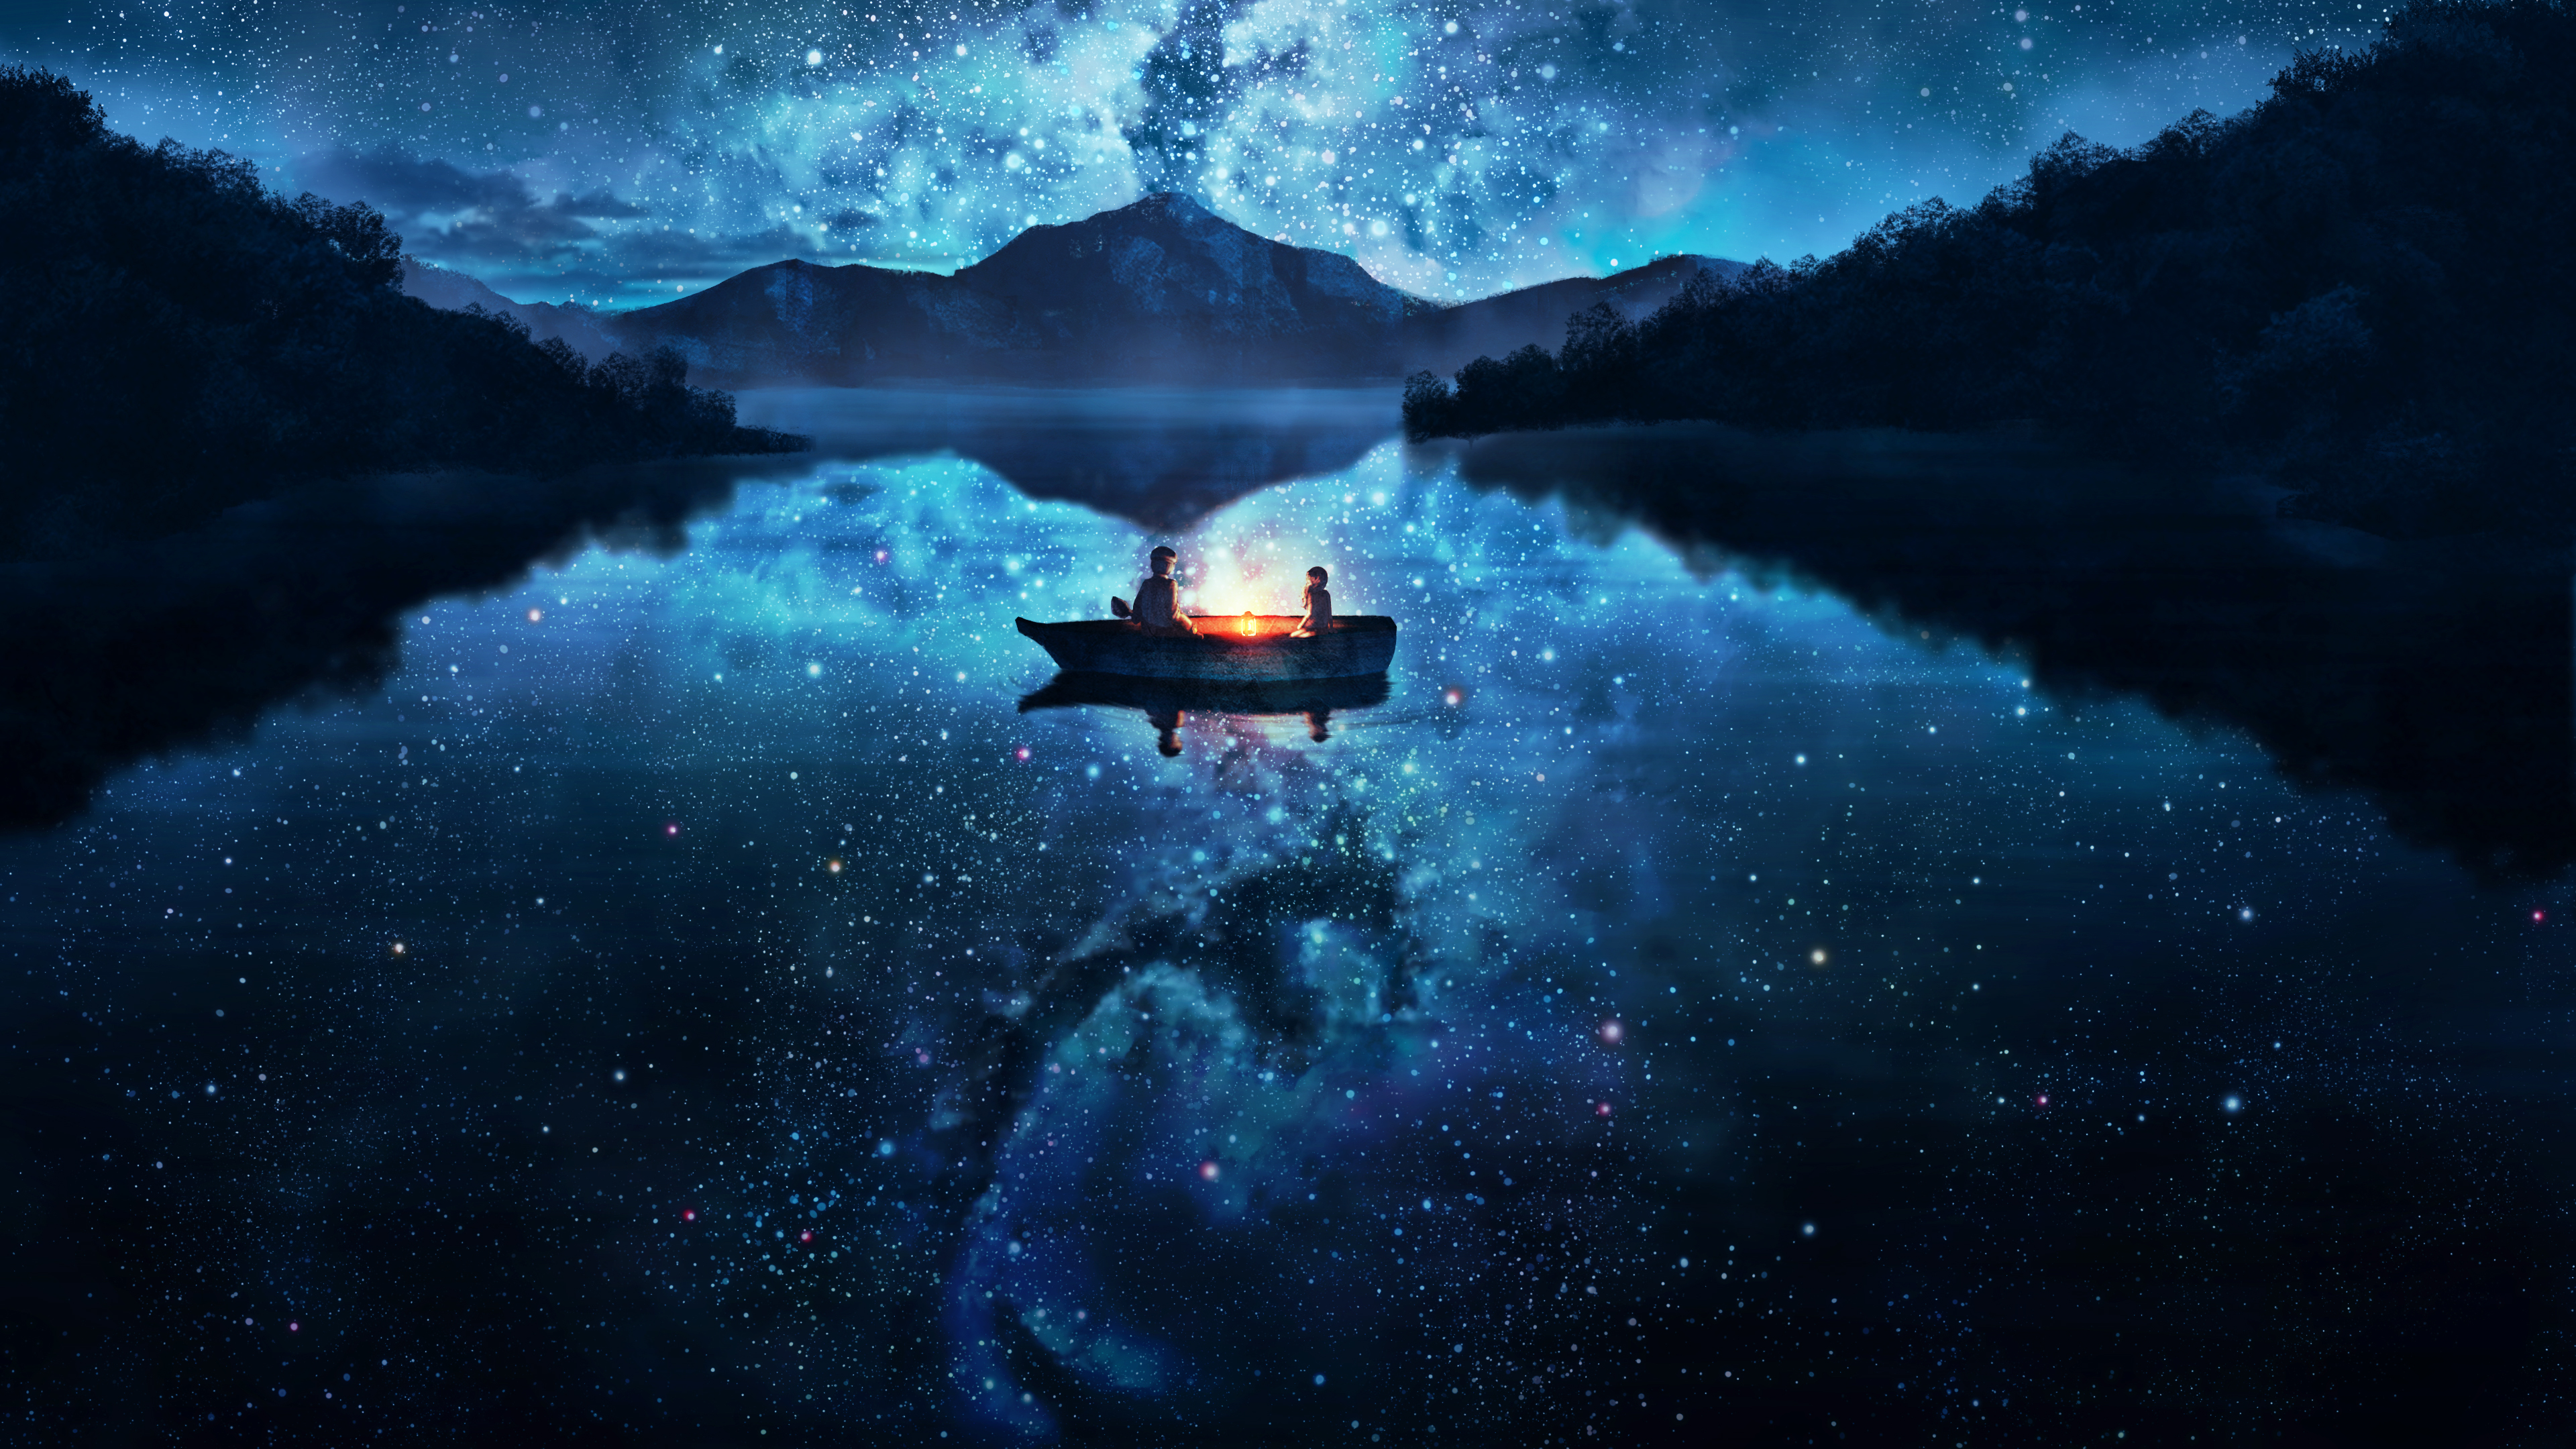 wallpapers night, lake, anime, reflection, starry sky, boat, scenic